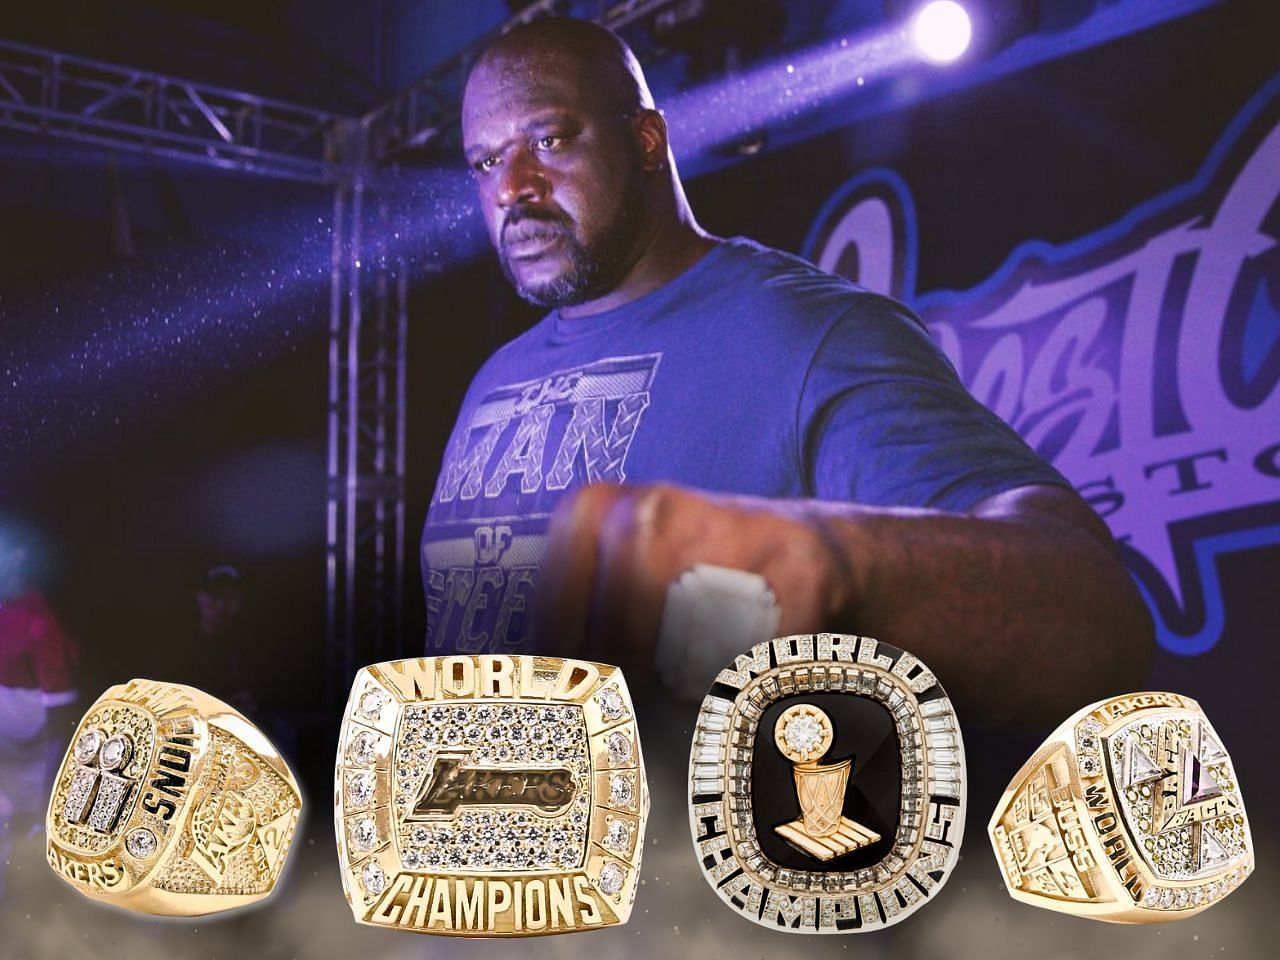 Shaquille O'Neal wore his Lakers championship ring to his Miami